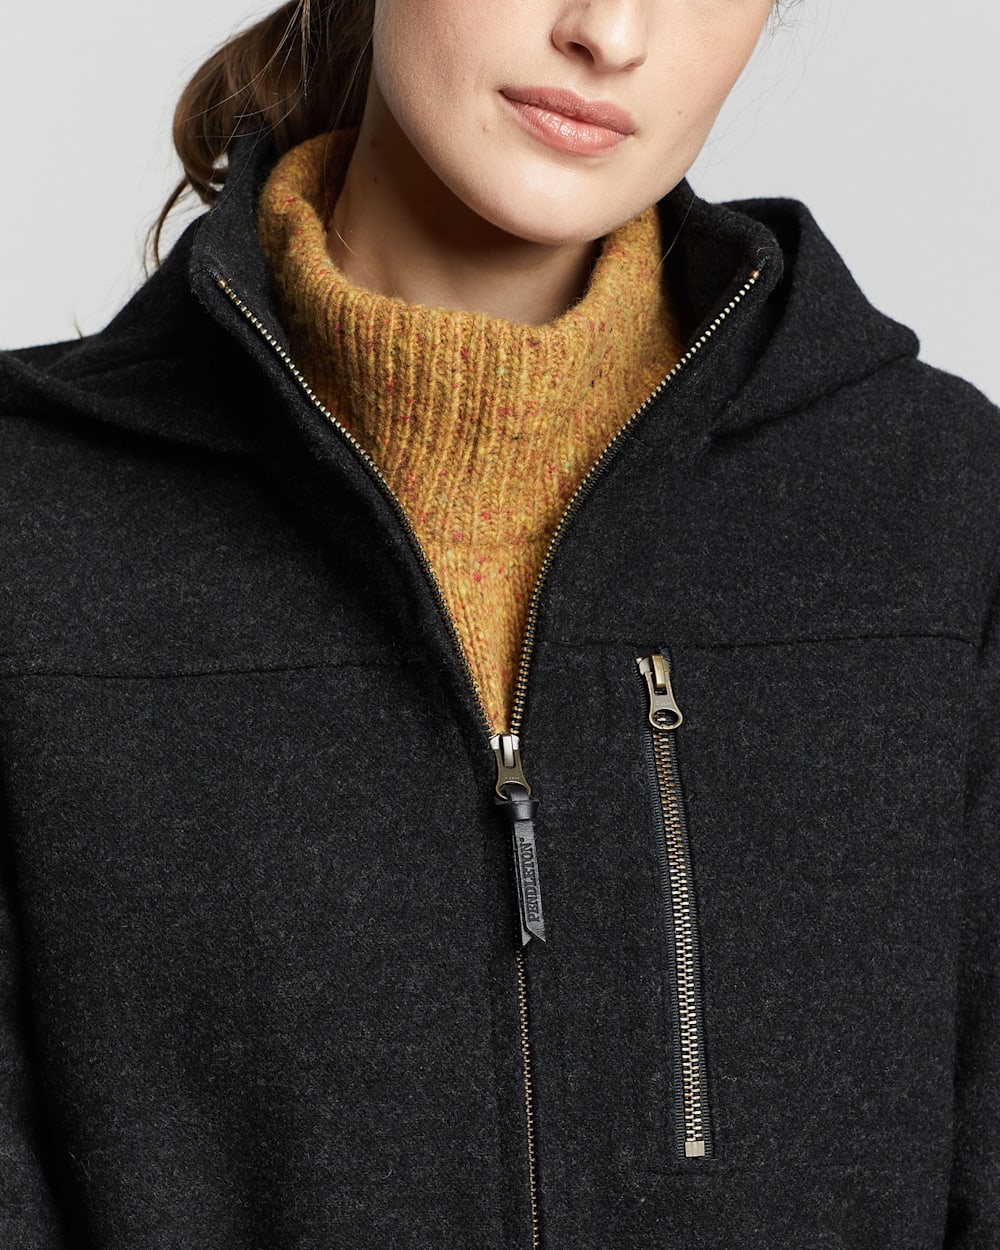 ALTERNATE VIEW OF WOMEN'S YAKIMA STRIPE WOOL PARKA IN CHARCOAL image number 4